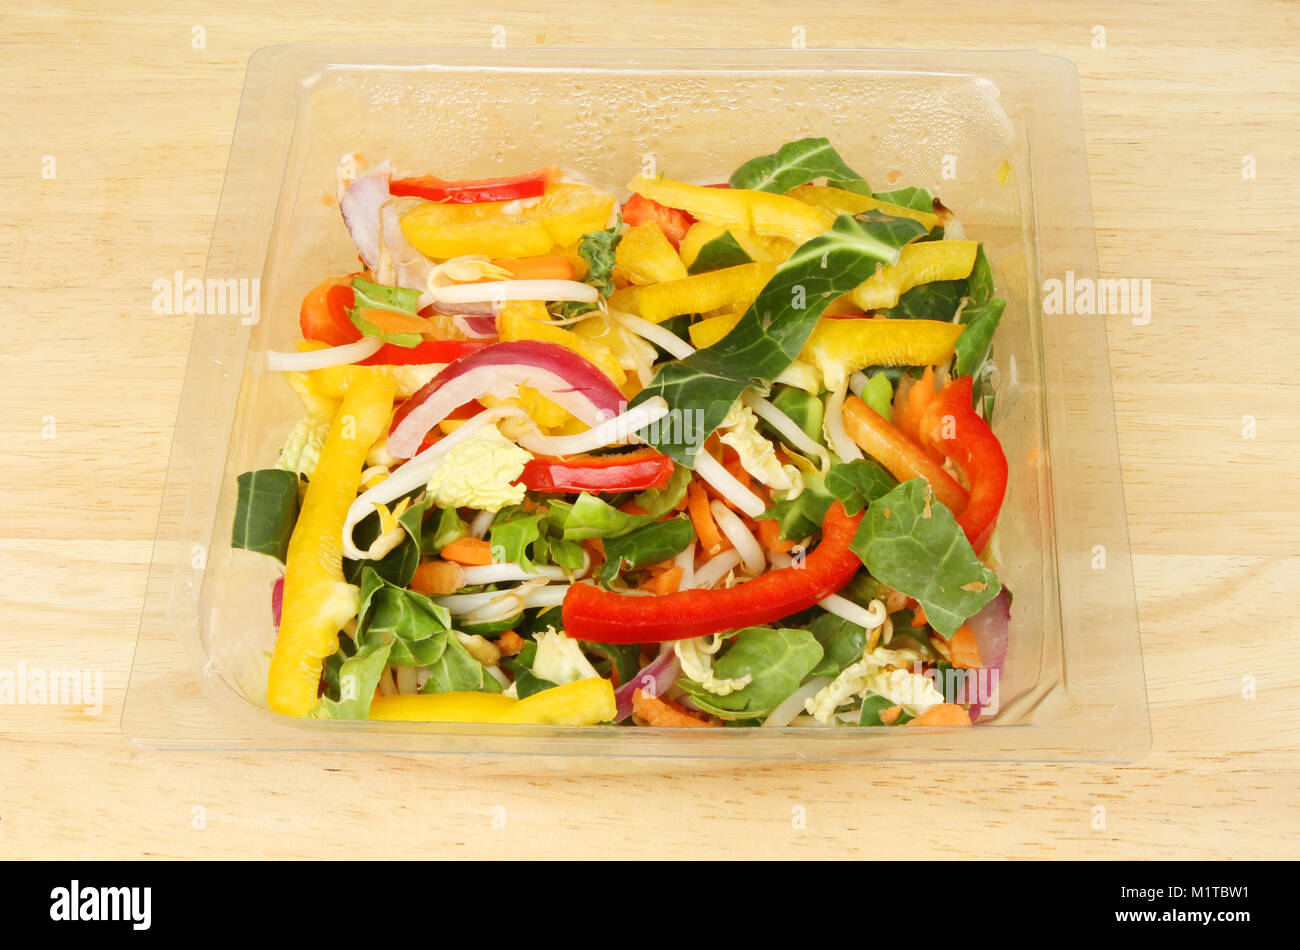 Stir fry vegetables in a plastic carton on a wooden chopping board Stock Photo